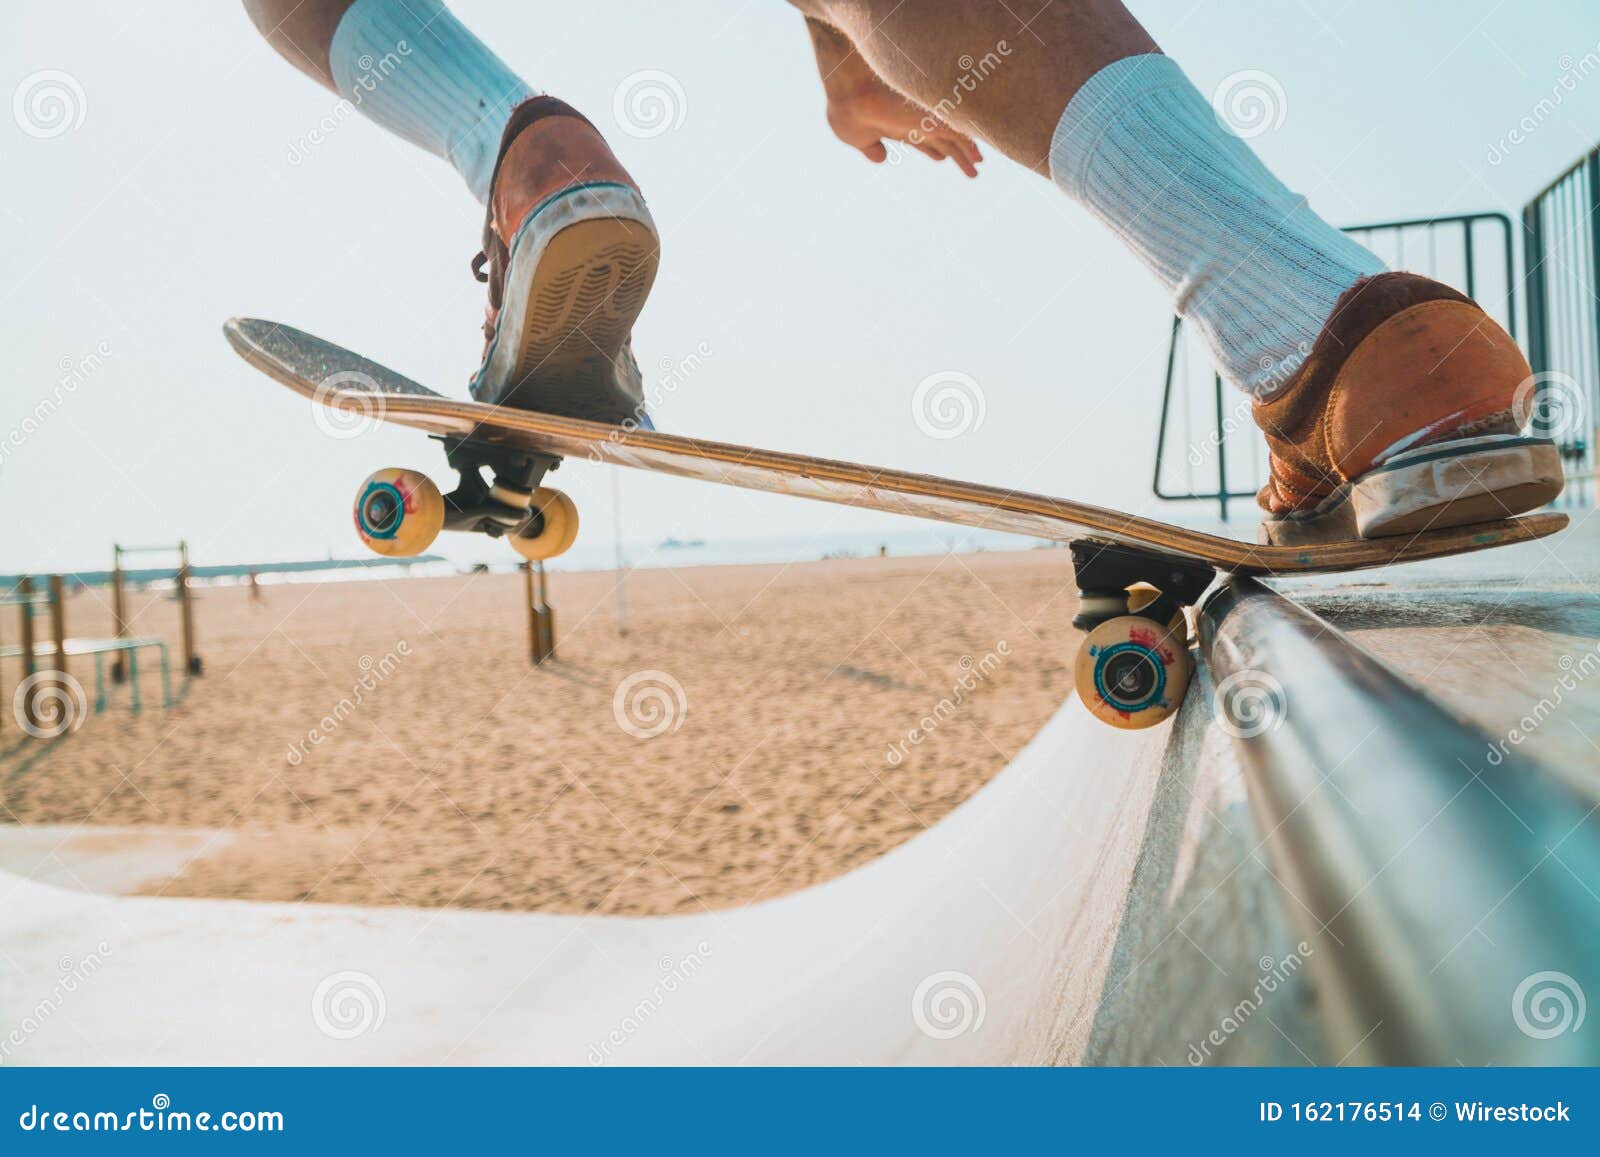 Sophie regeling Jachtluipaard Low Angle Shot of a Male Skating on a Skate Ramp in the Scheveningen the  Netherlands on a Beach Stock Photo - Image of sport, beach: 162176514